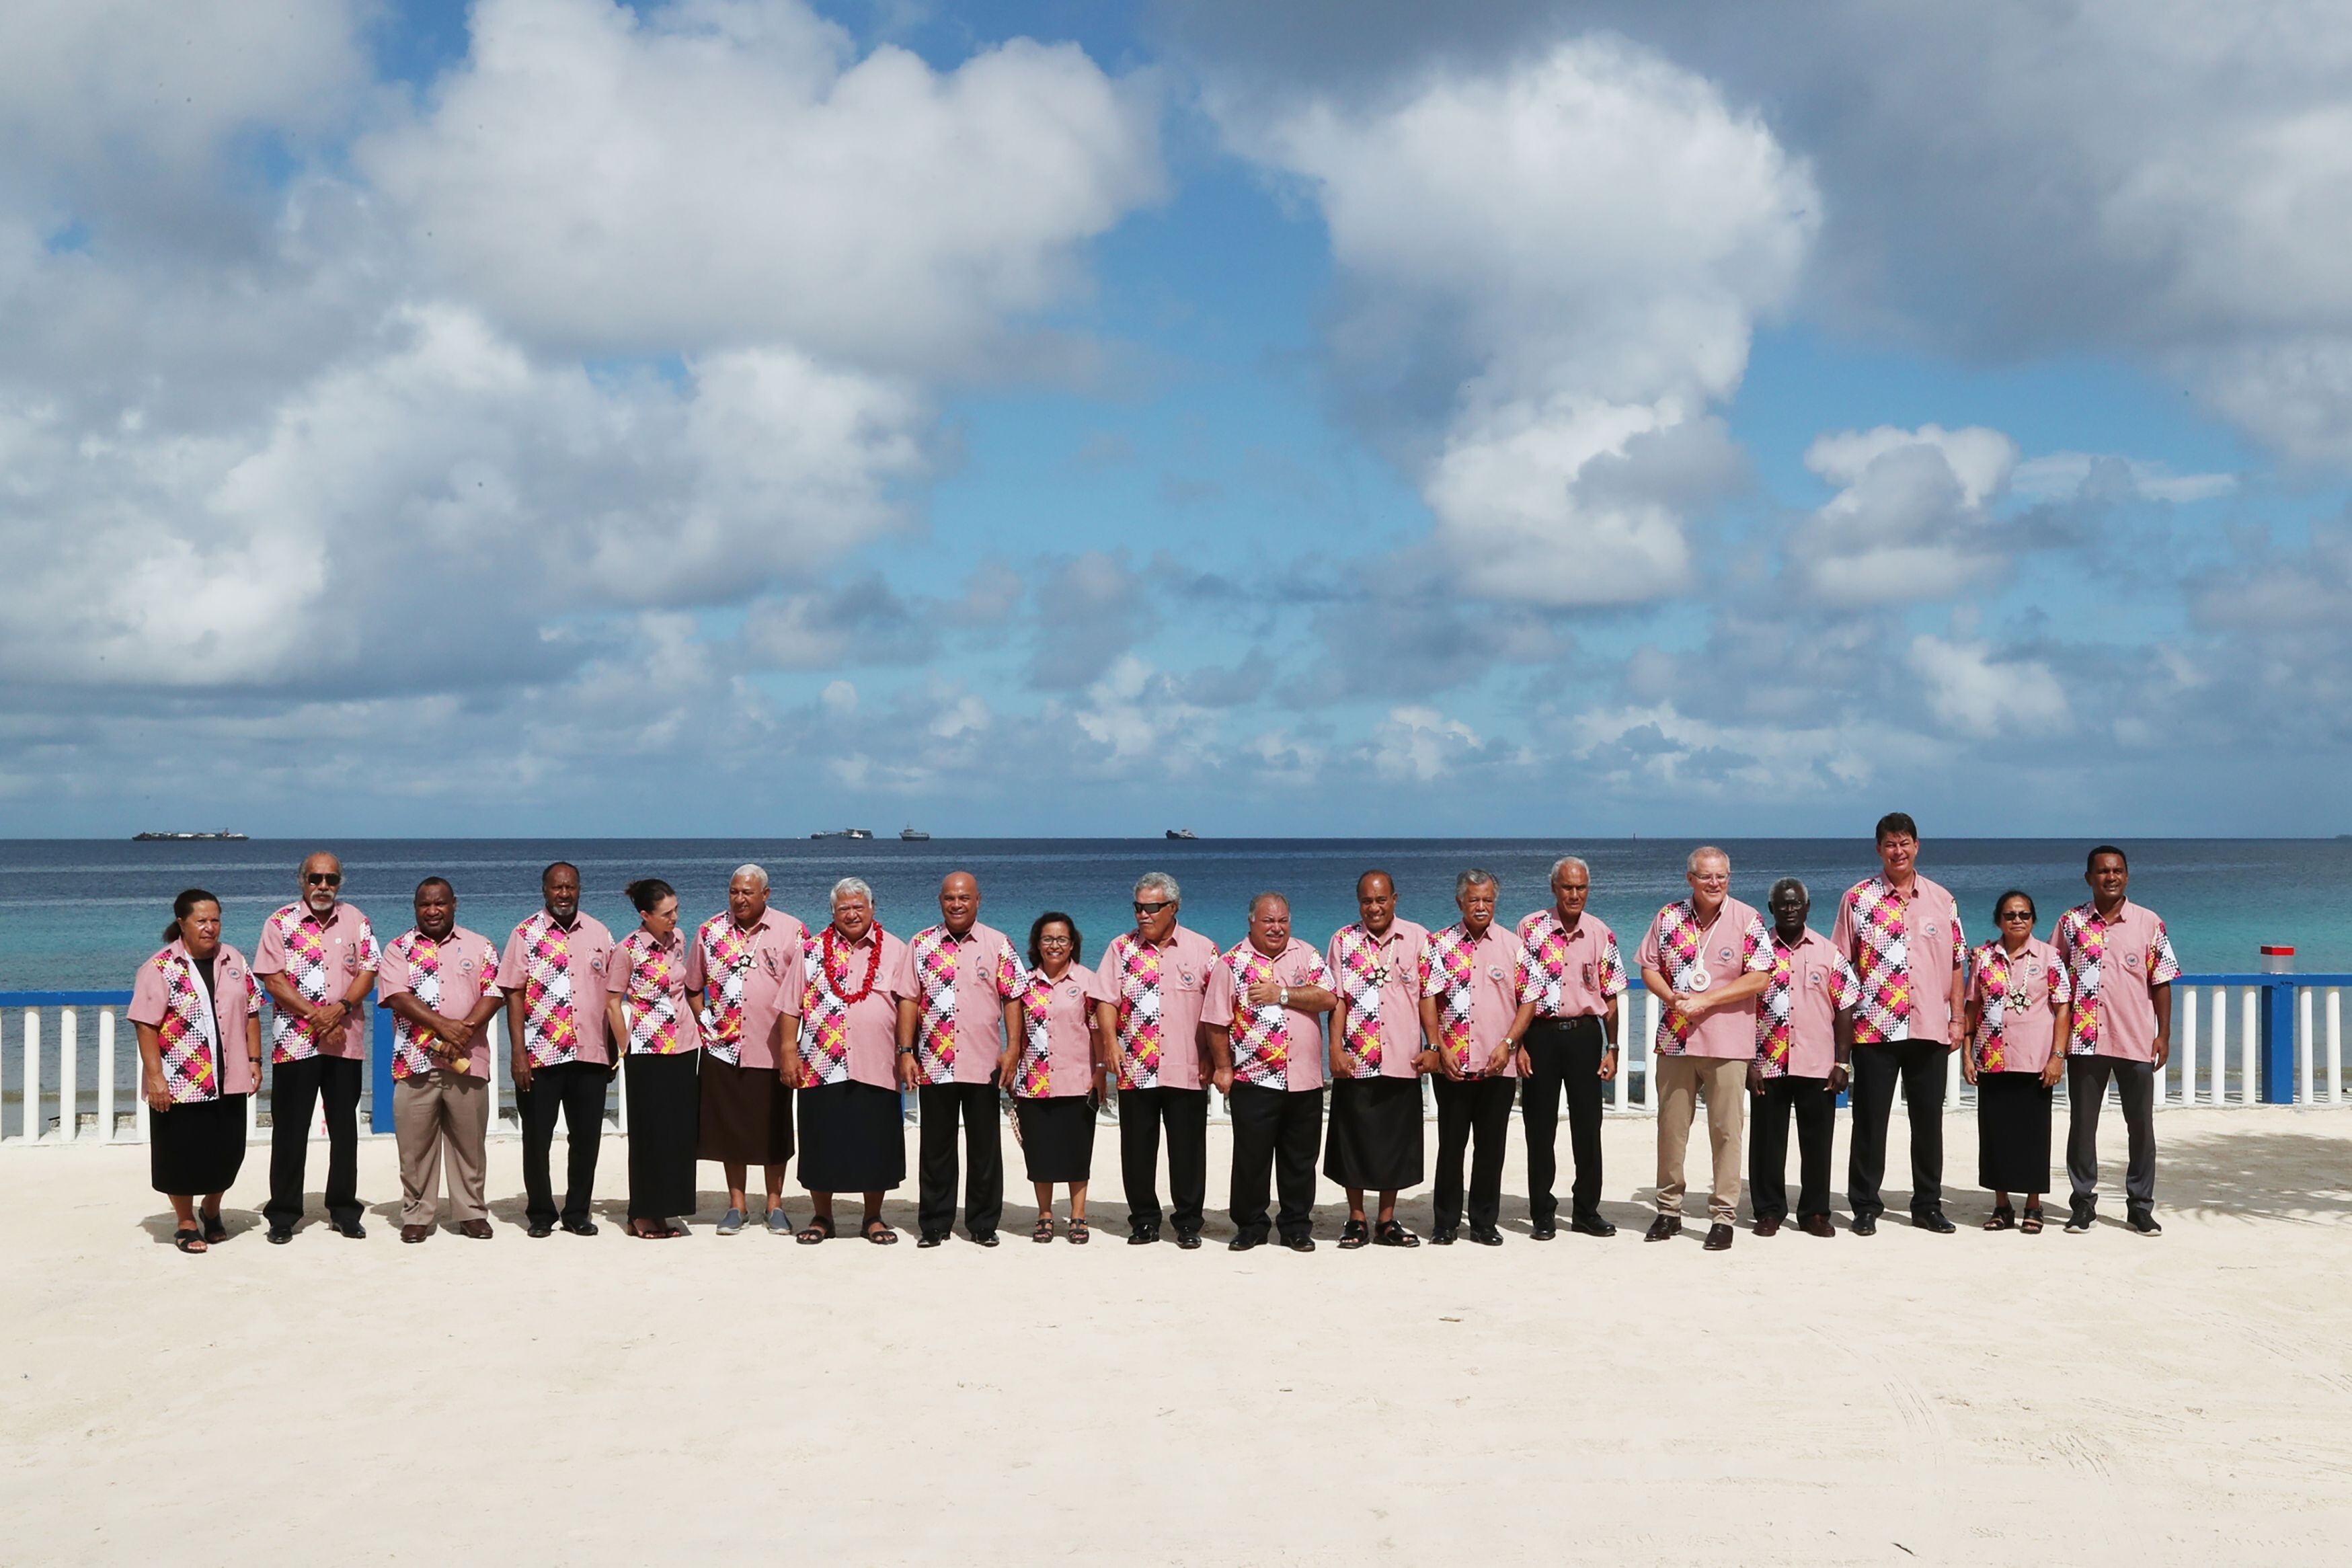 Australia’s Prime Minister Scott Morrison (fifth from right) poses for a group photo with other leaders on the sidelines of the Pacific Islands Forum in Tuvalu on August 15, 2019. Photo: AFP/Australian Prime Minister’s Office